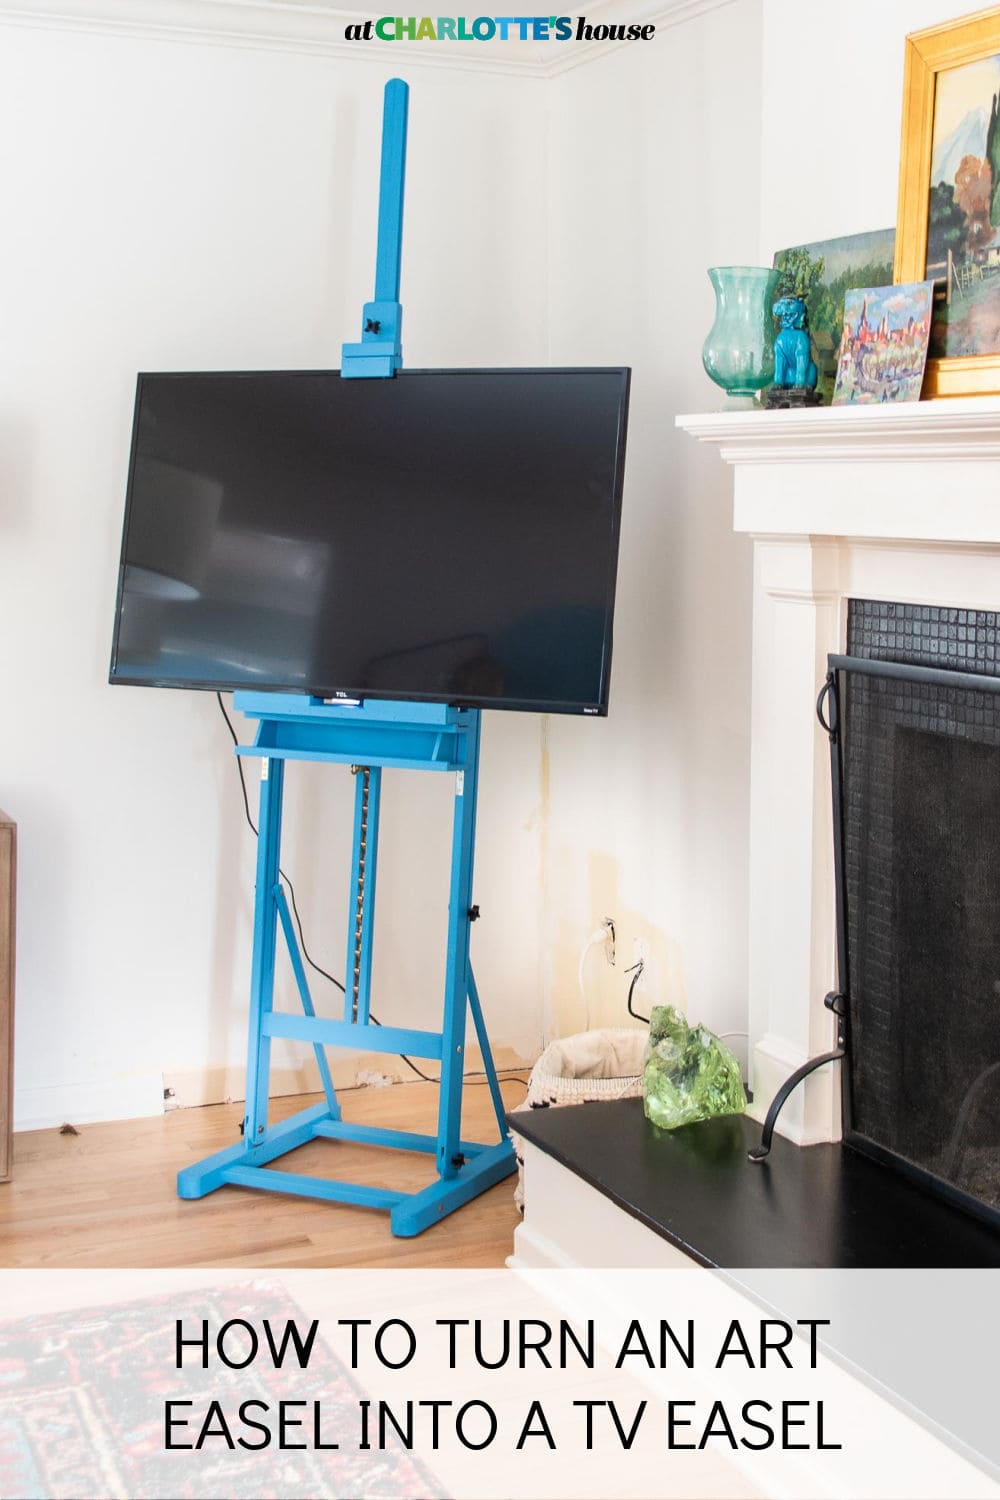 https://atcharlotteshouse.com/wp-content/uploads/2021/02/HOW-TO-TURN-AN-ART-EASEL-INTO-A-TV-EASEL.jpg